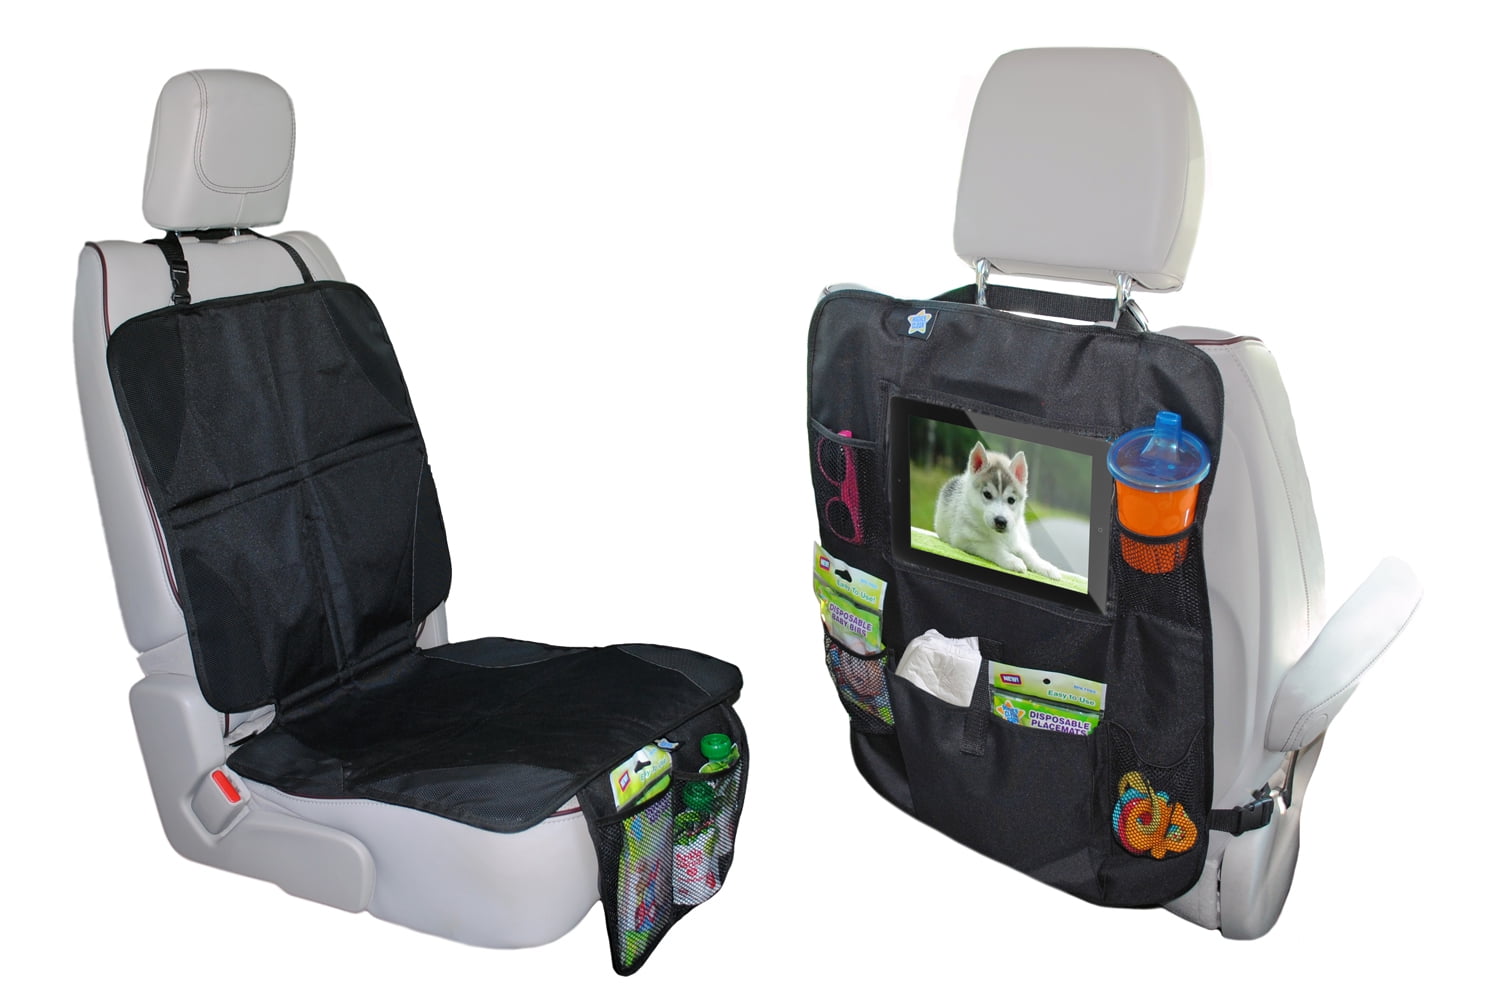 Summer Duomat 2-In-1 Car Seat Protection Infant Toddler Mode Pockets Black New 